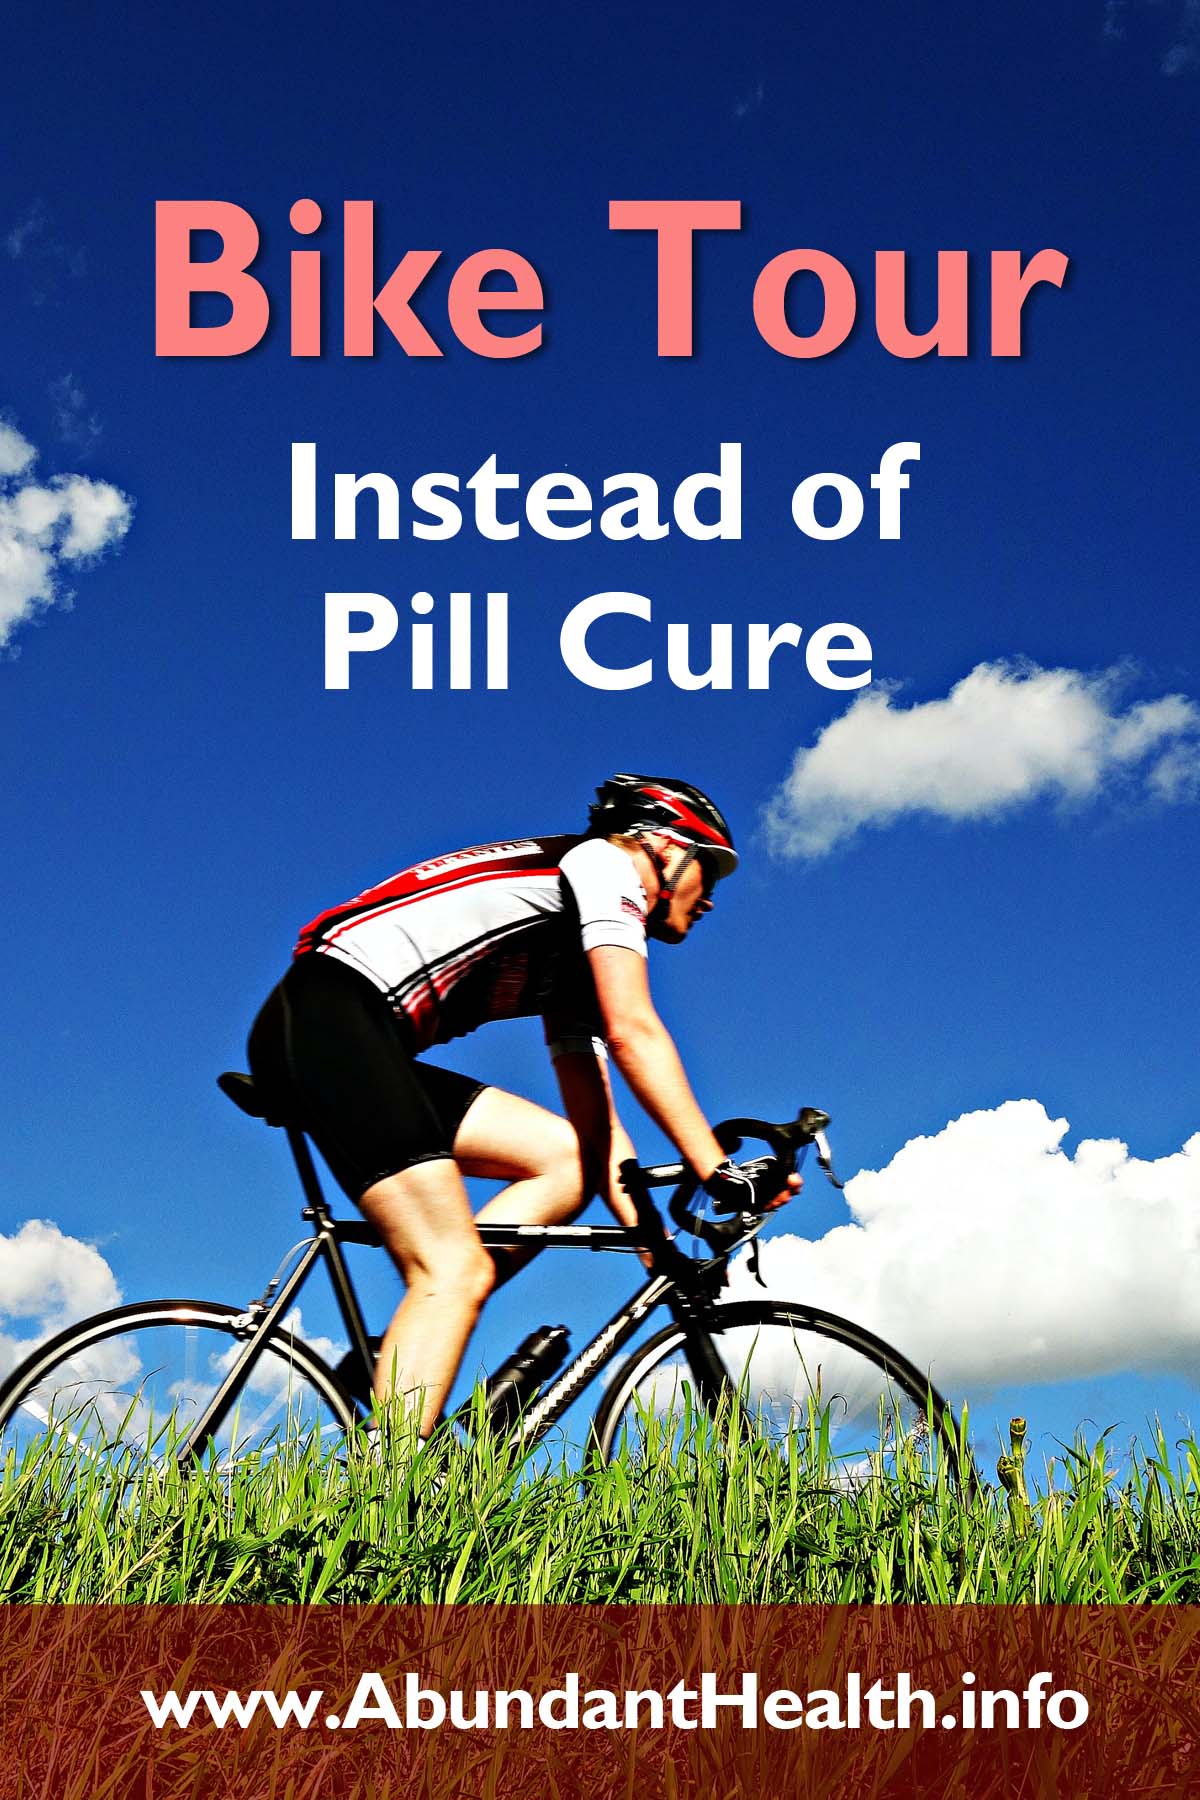 Bike Tour Instead of Pill Cure